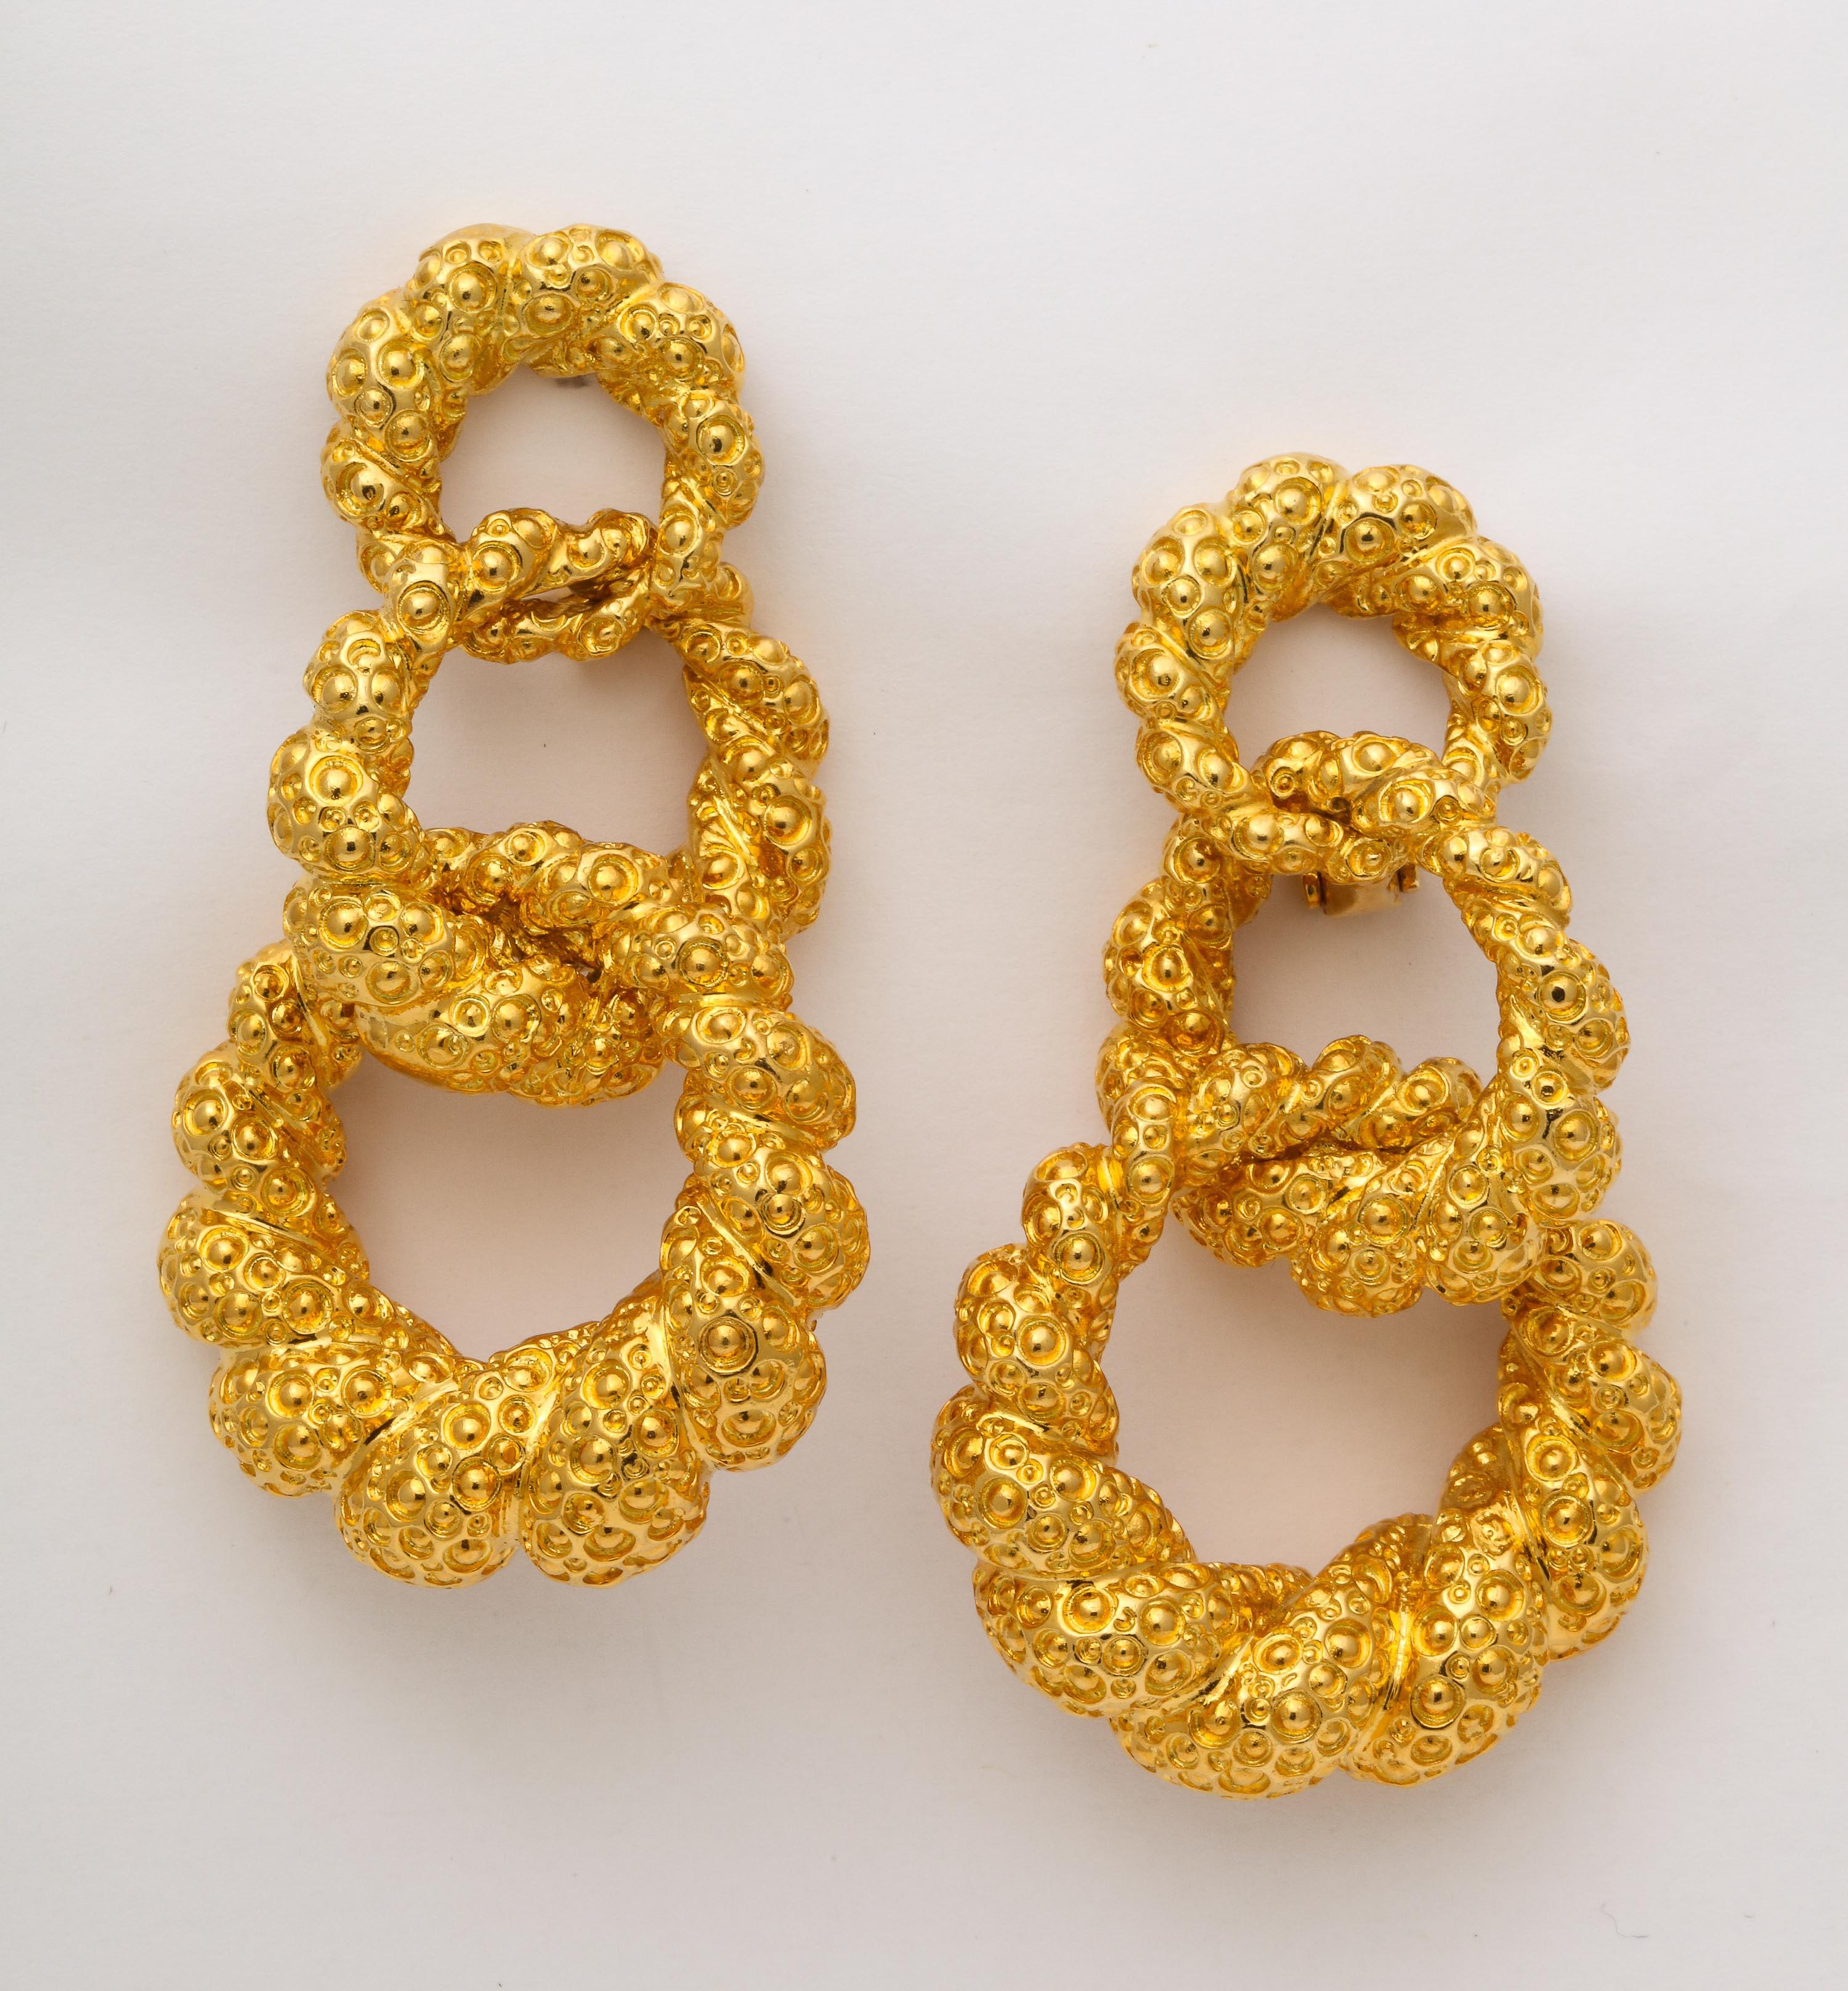 Ca 1980 = Large Triple Hoop clip on 18kt Yellow Gold Earrings.  Facing left and facing right.  Earring Backs are 14kt Clips.
Very cha-cha-cha -  Certainly right for any mood - from frivolous to super chic.